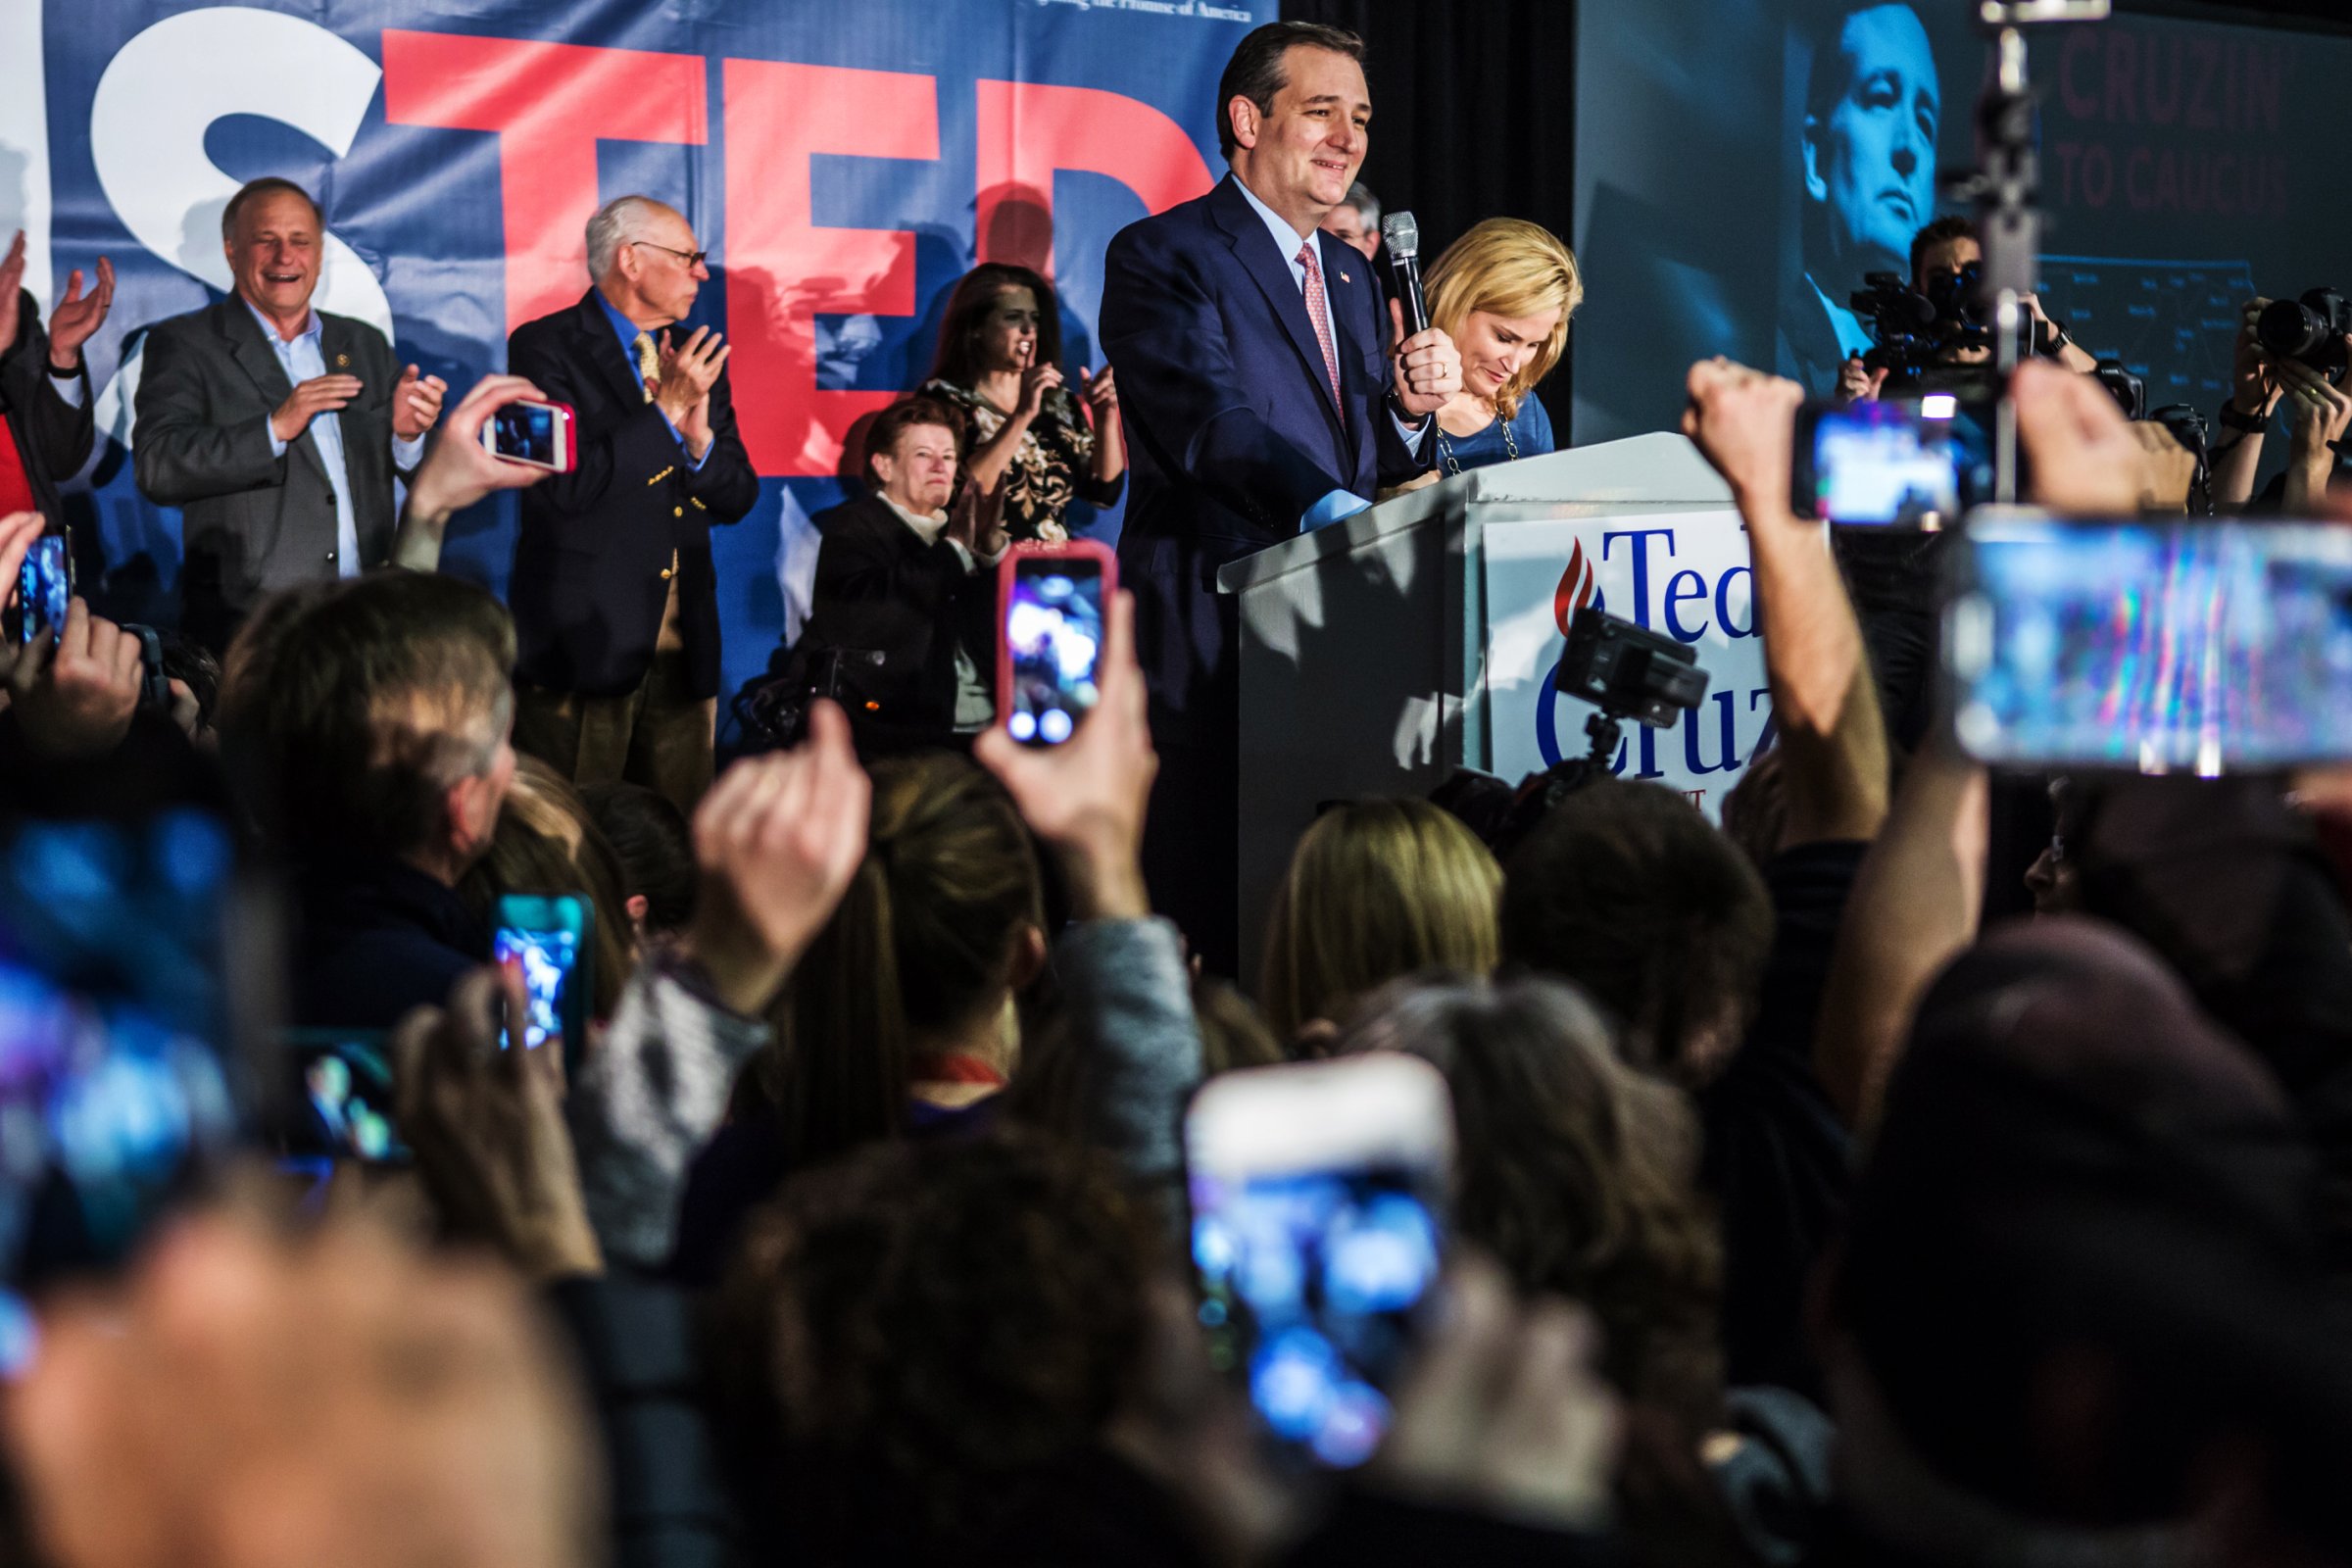 Republican presidential candidate Sen. Ted Cruz, r-TX, joined by his wife Heidi Cruz, speaks at a caucus night rally in Des Moines, Iowa, on Feb. 1, 2016.